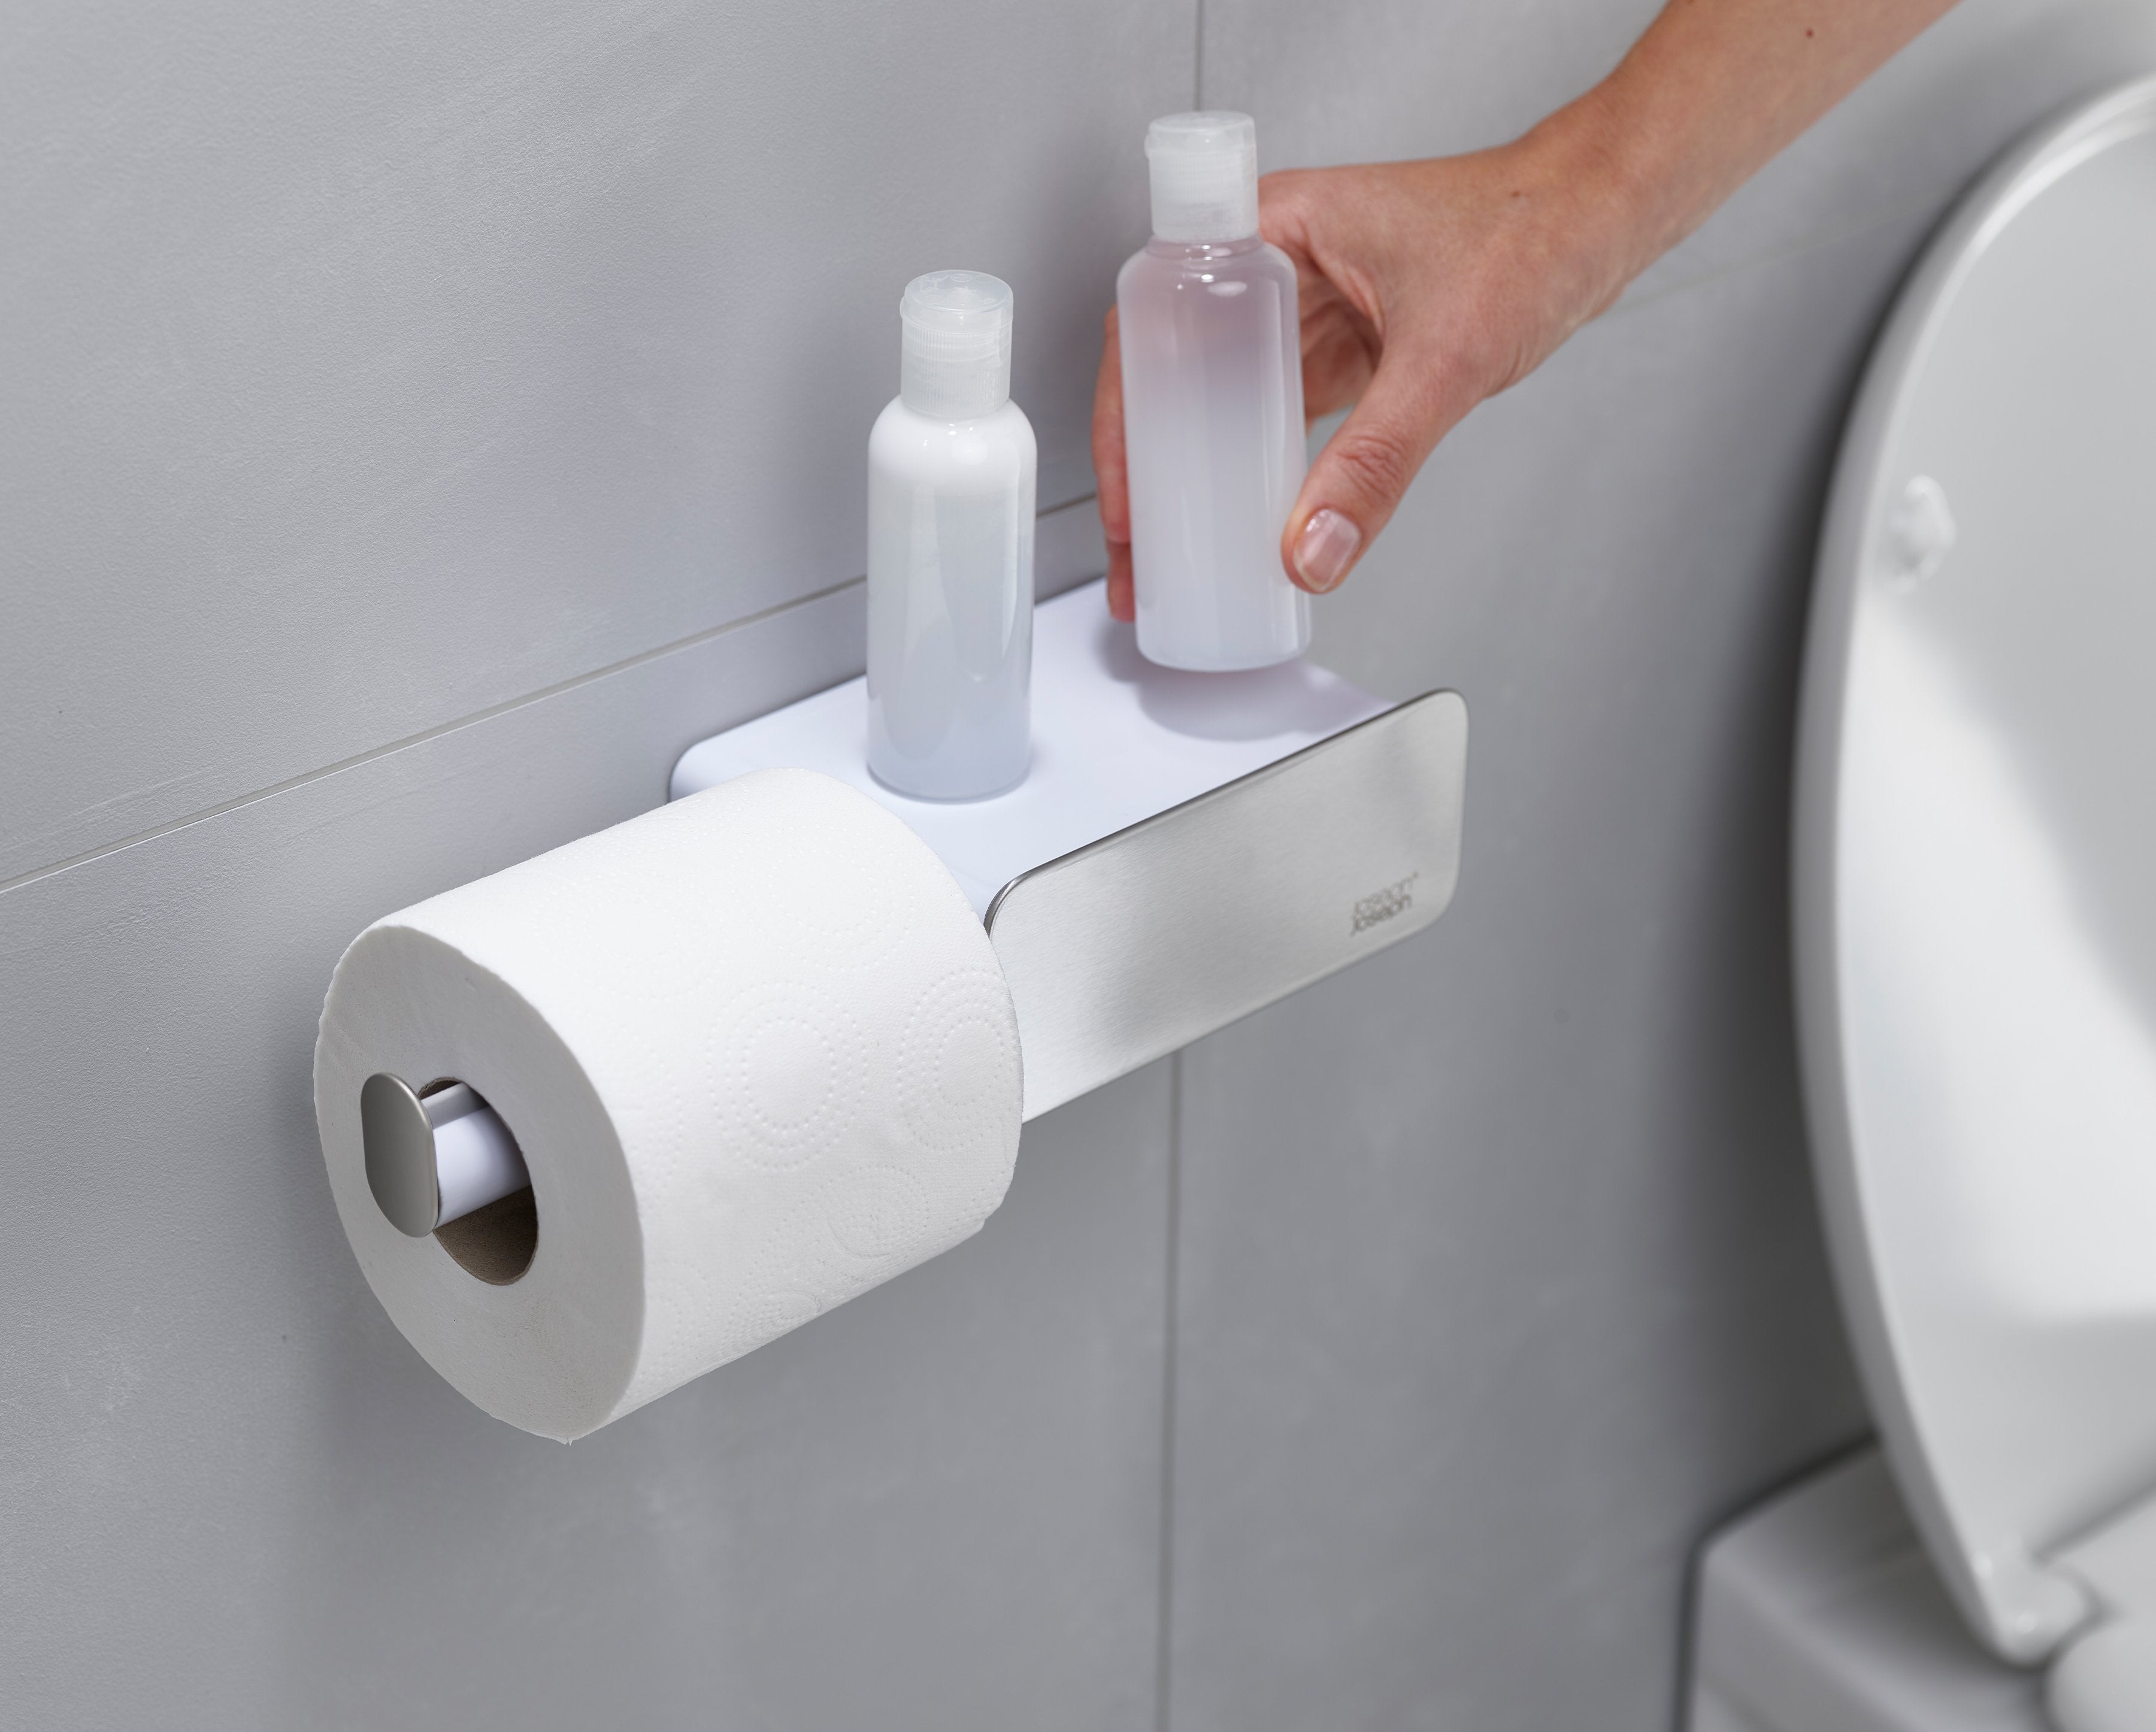 BEON.COM.AU  This smart wall-mounted toilet roll holder has several additional features including a handy storage shelf with an integrated small drawer beneath it that’s perfect for discretely storing sanitary items.  Friction-grip roll holder prevents roll unravelling Handy storage shelf Discrete drawer for... Joseph Joseph at BEON.COM.AU